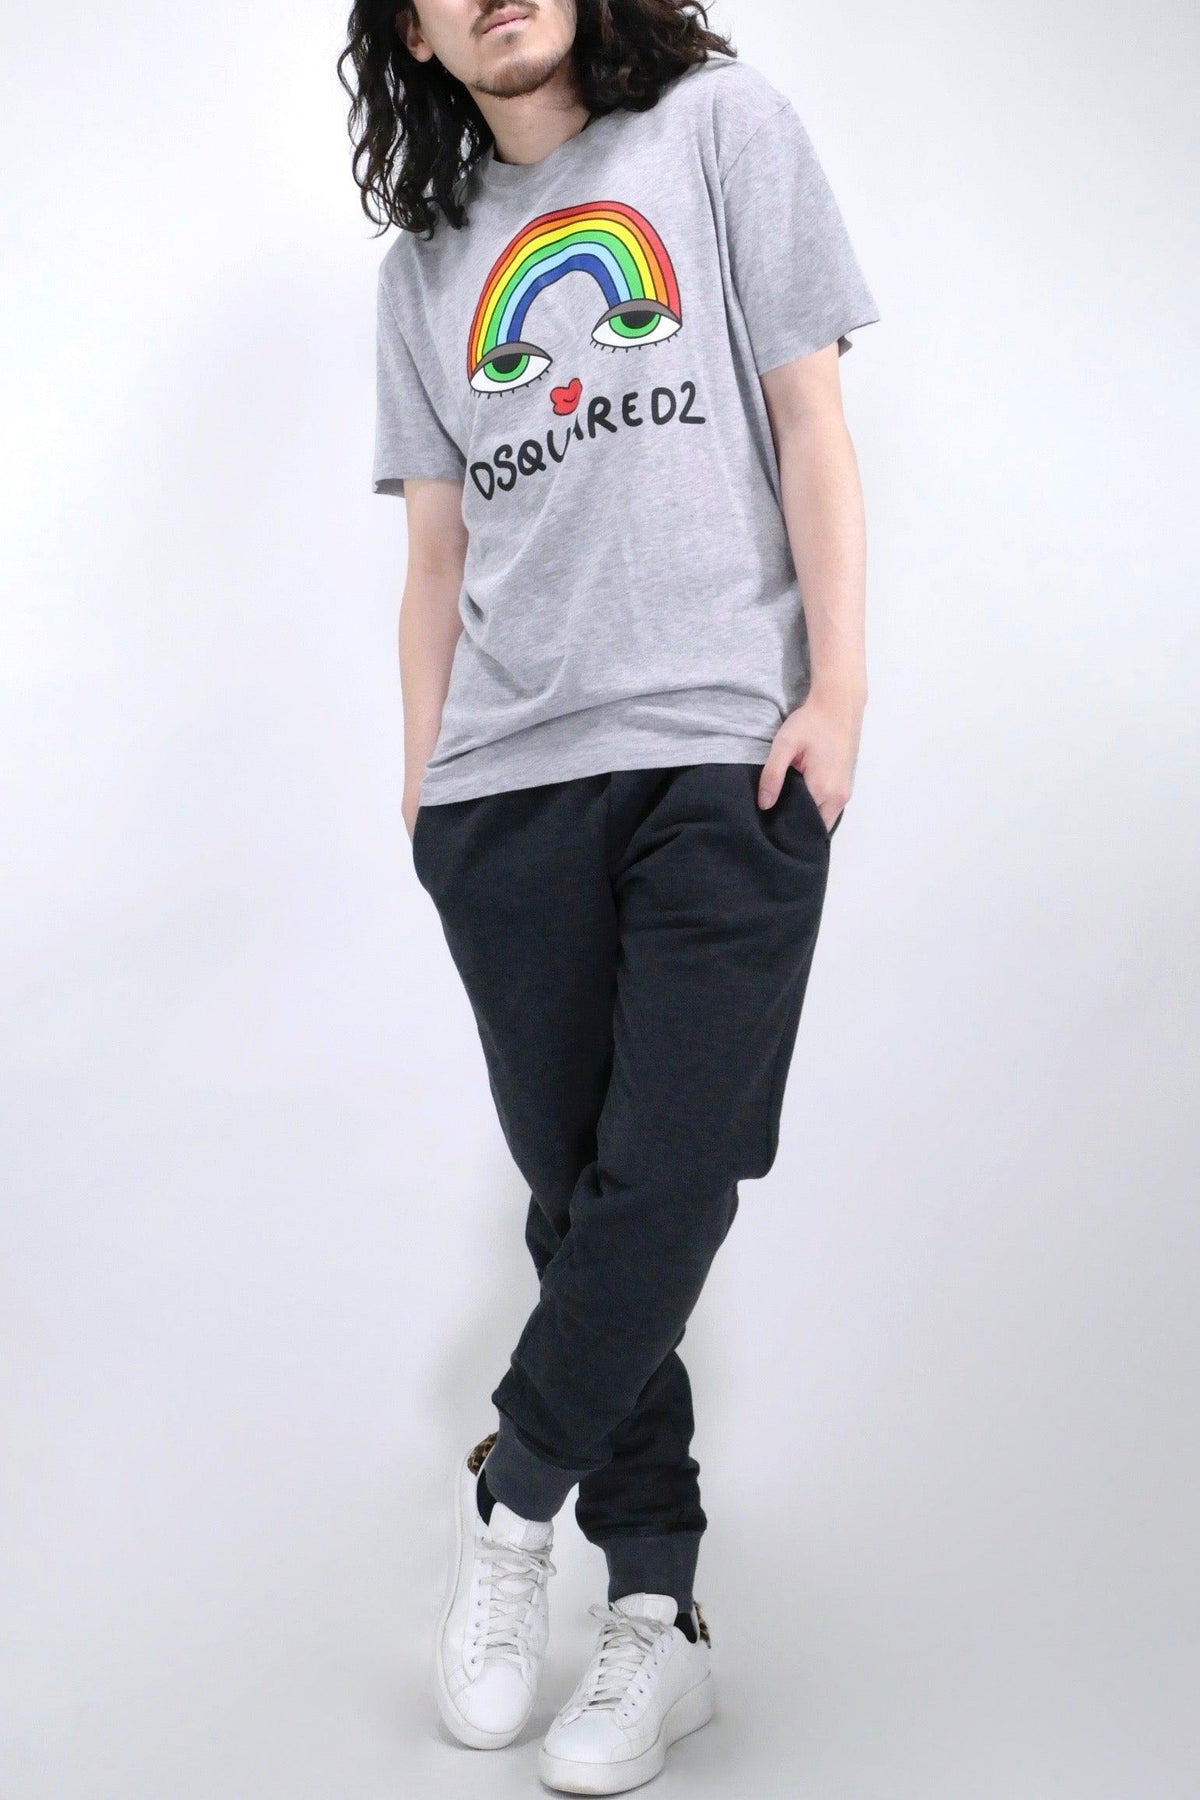 Dsquared2 Rainbow Cool Graphic Tee - Grey Melange - Due West